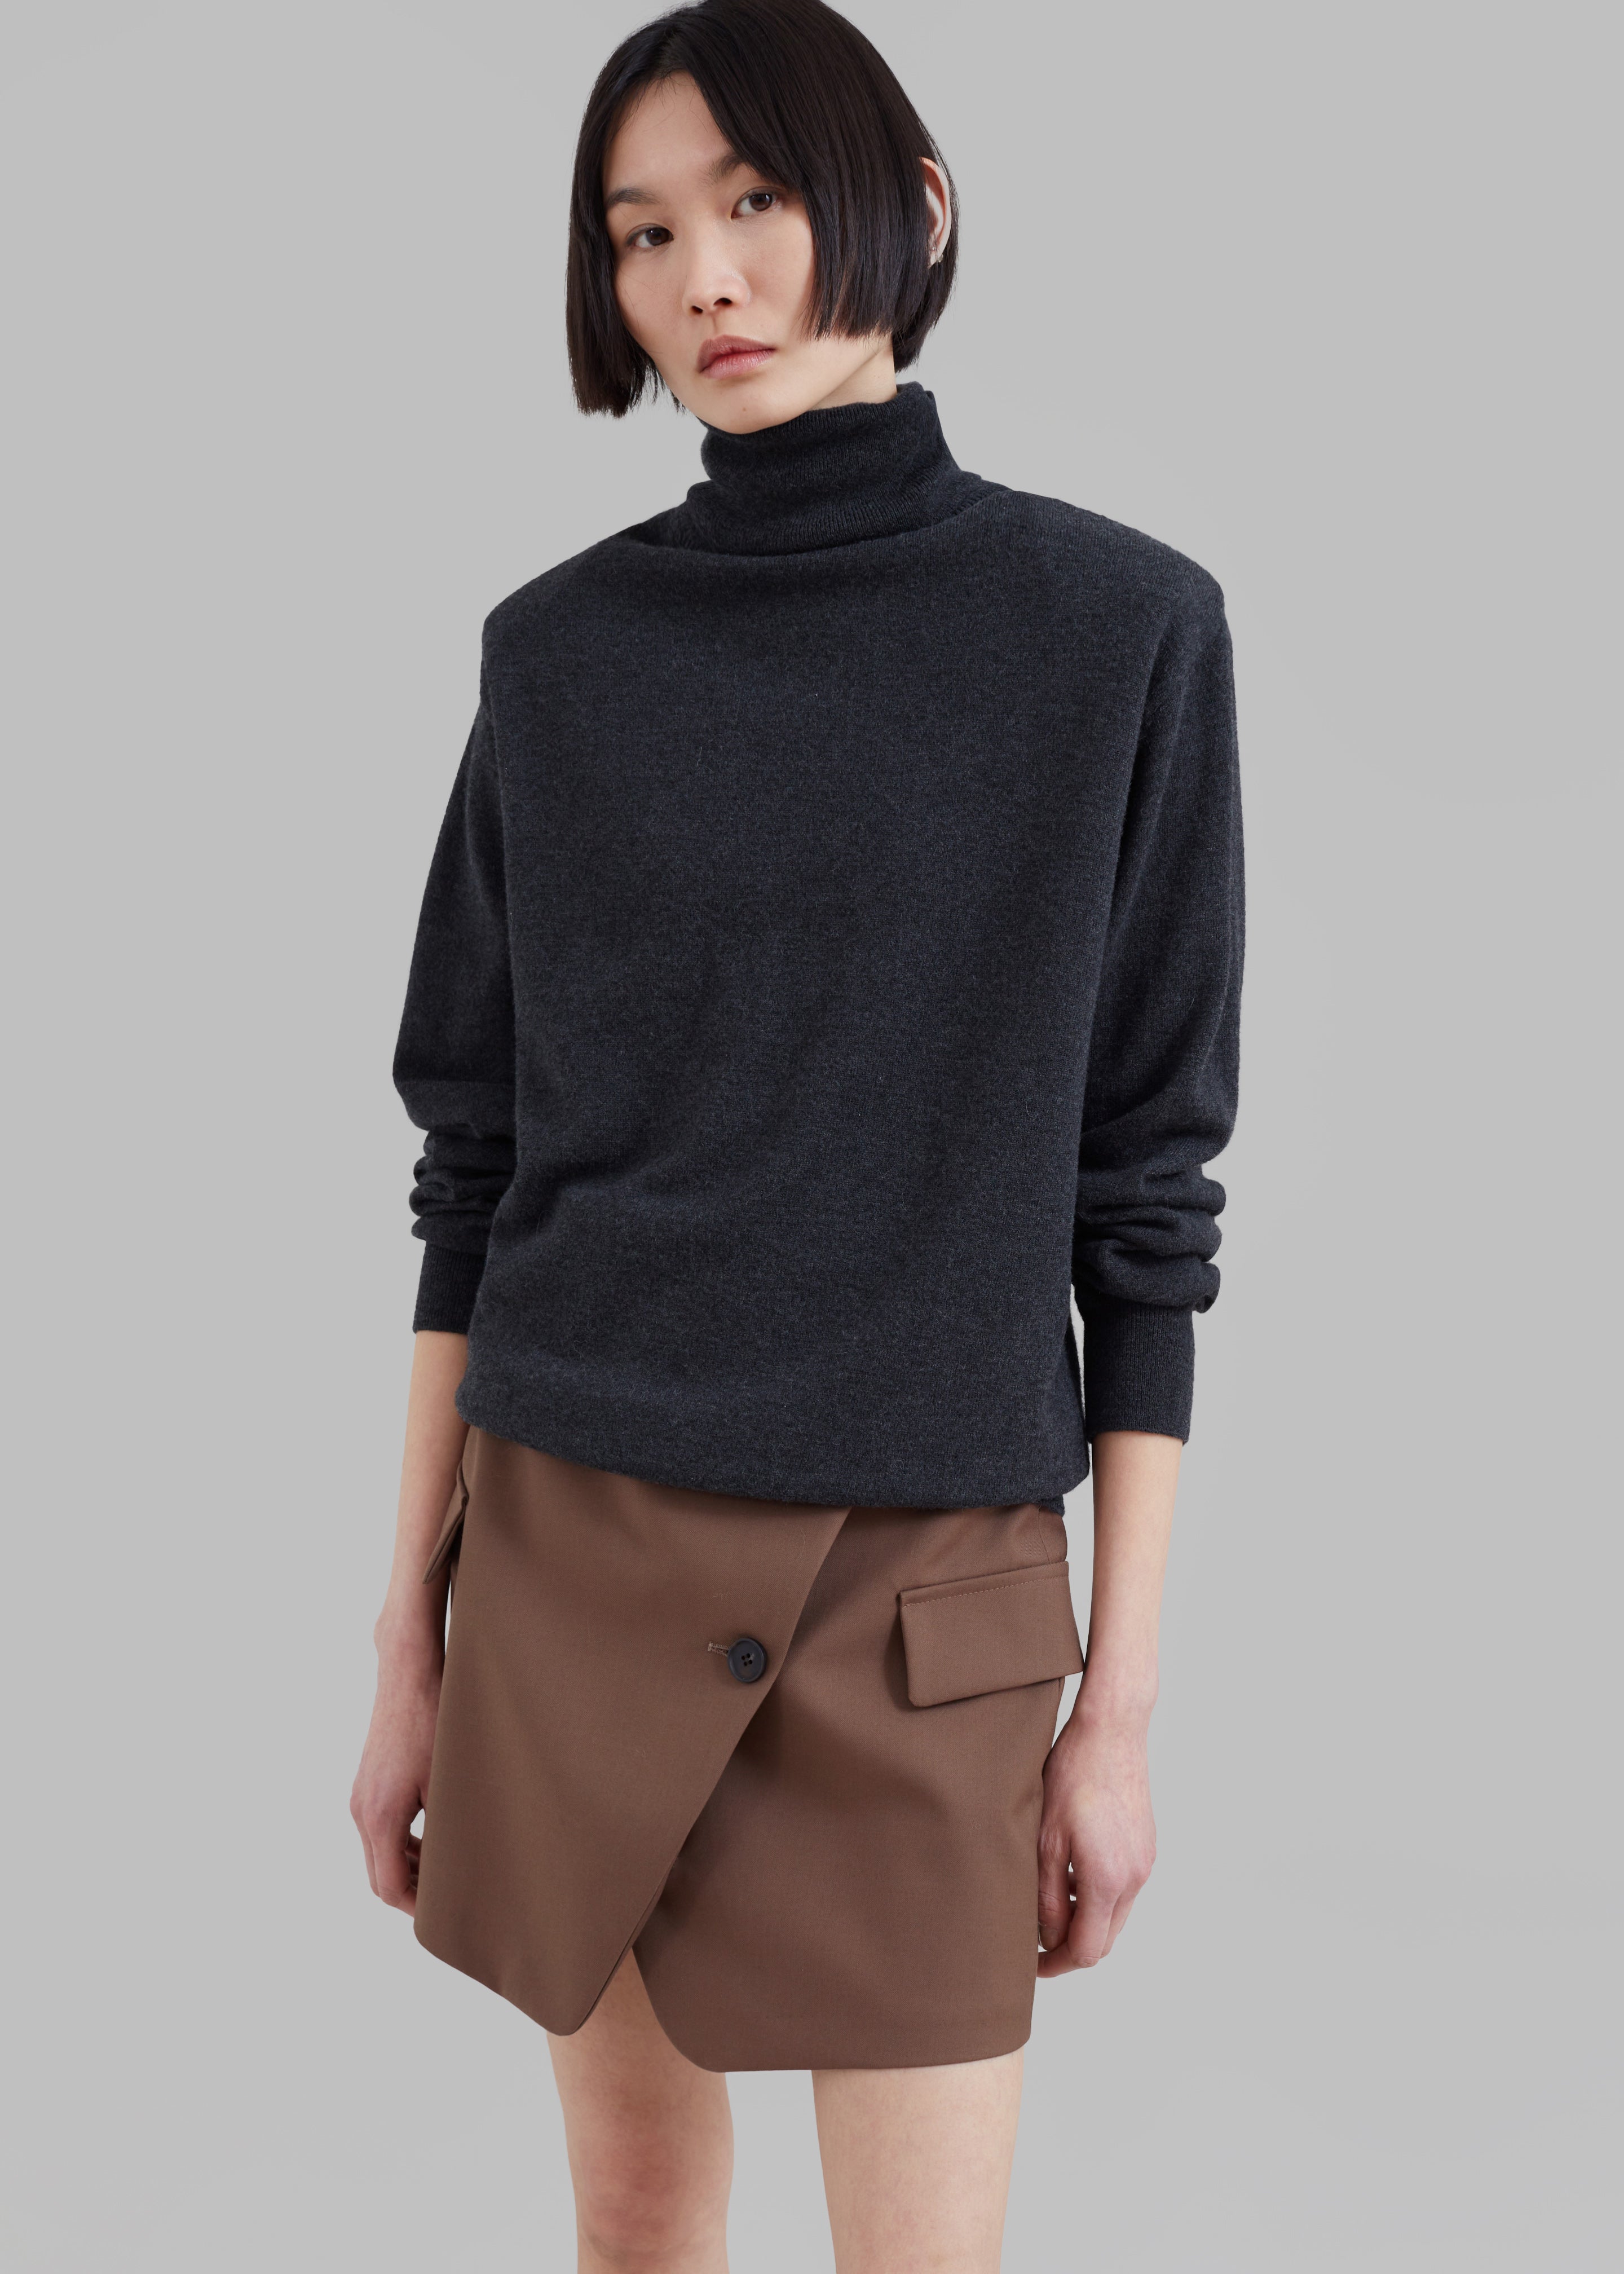 Ines Thin Padded Turtleneck - Charcoal - 2